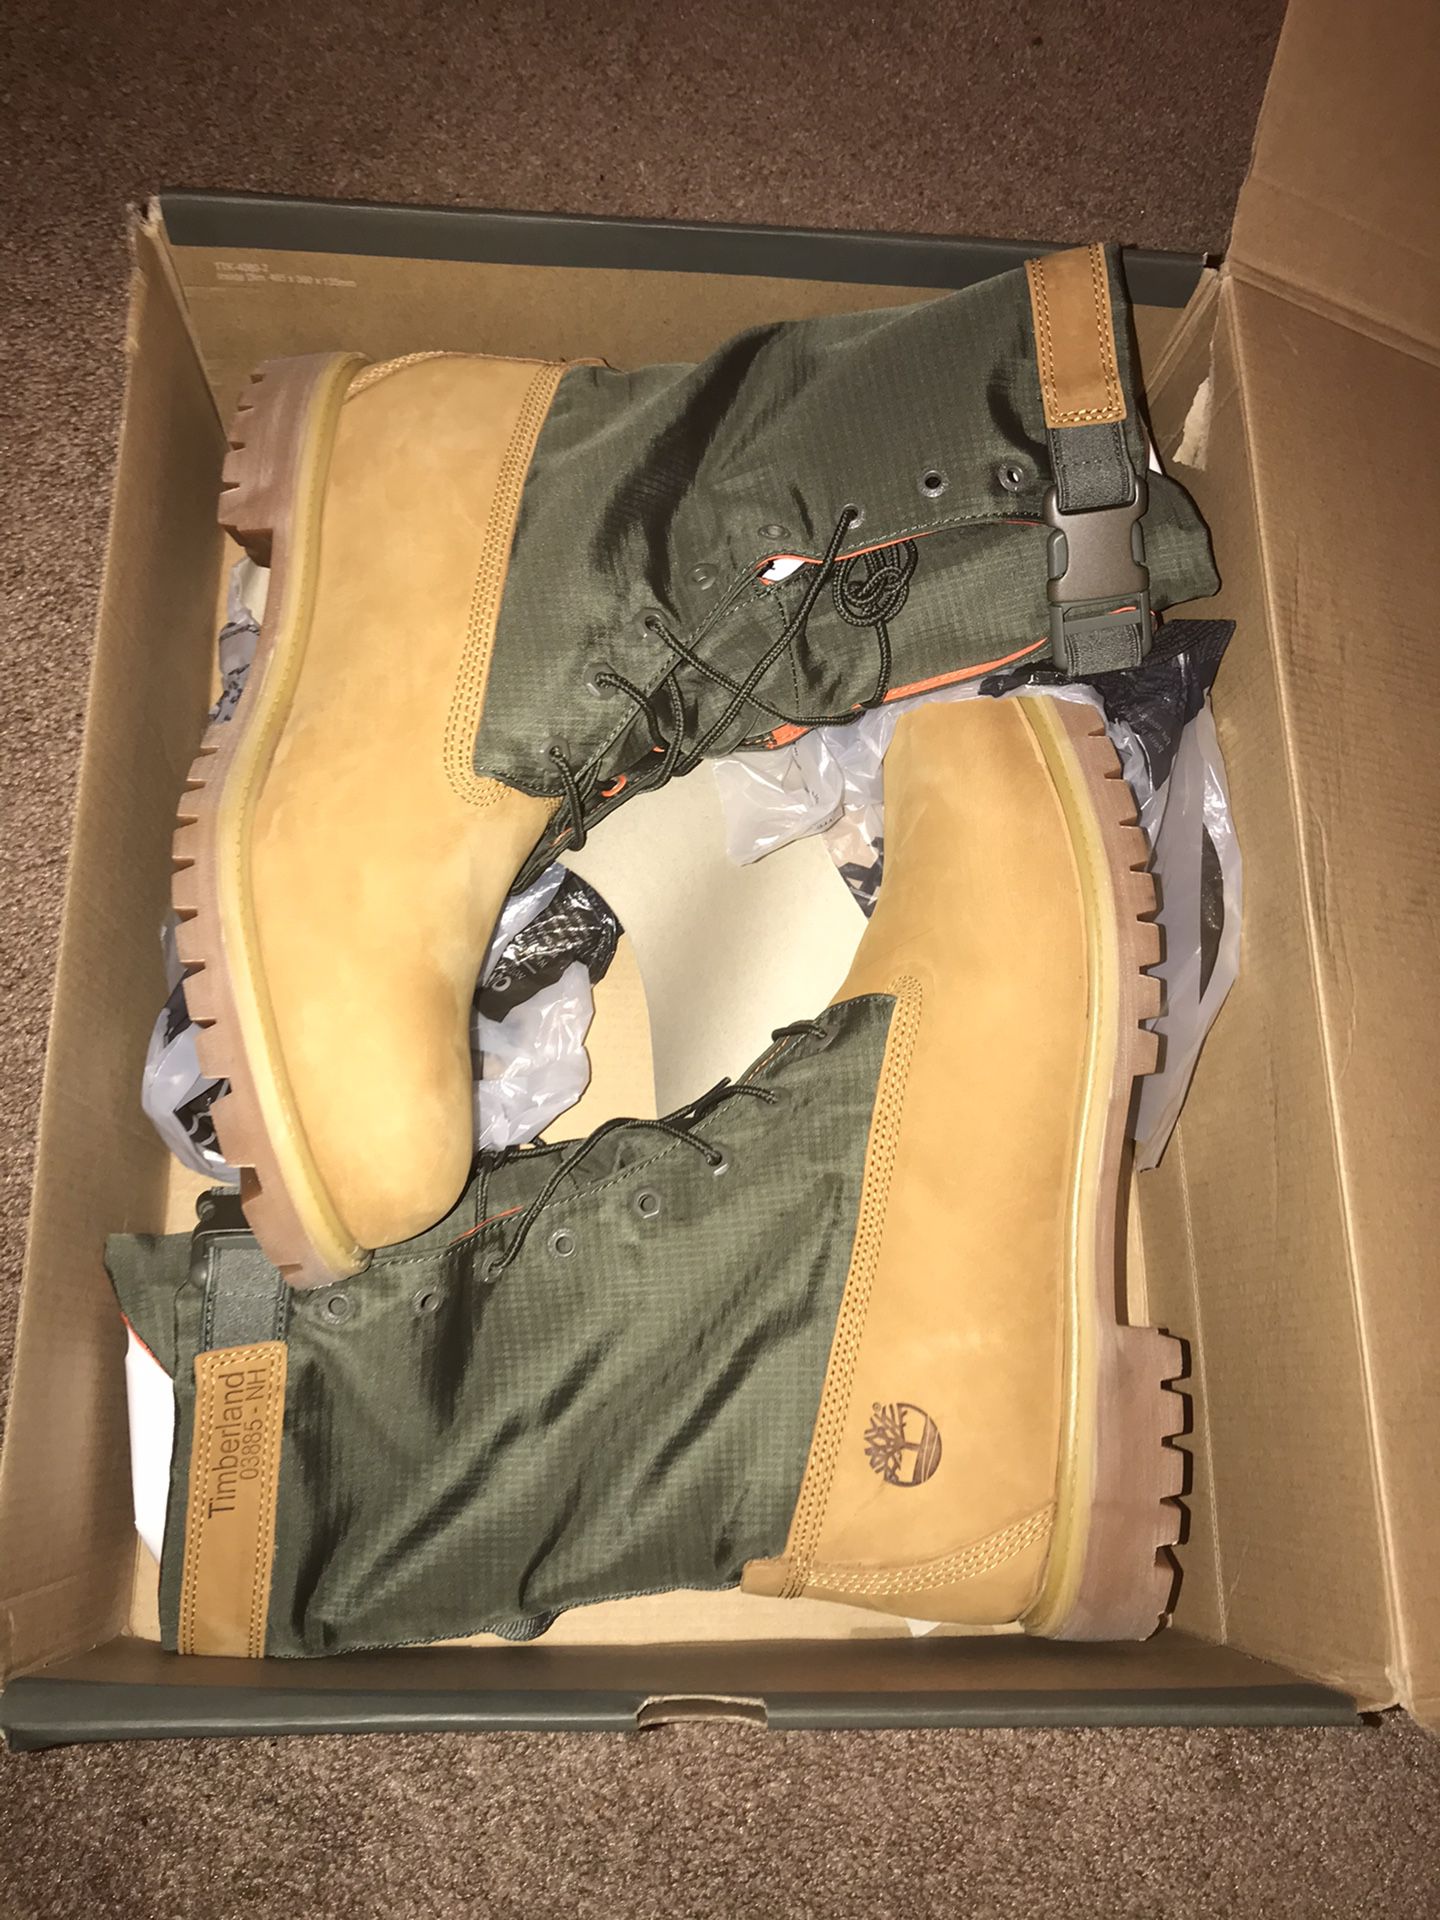 Timberland 6" Premium Gaiter Men's Boots Size 14 Limited Release Wheat Green